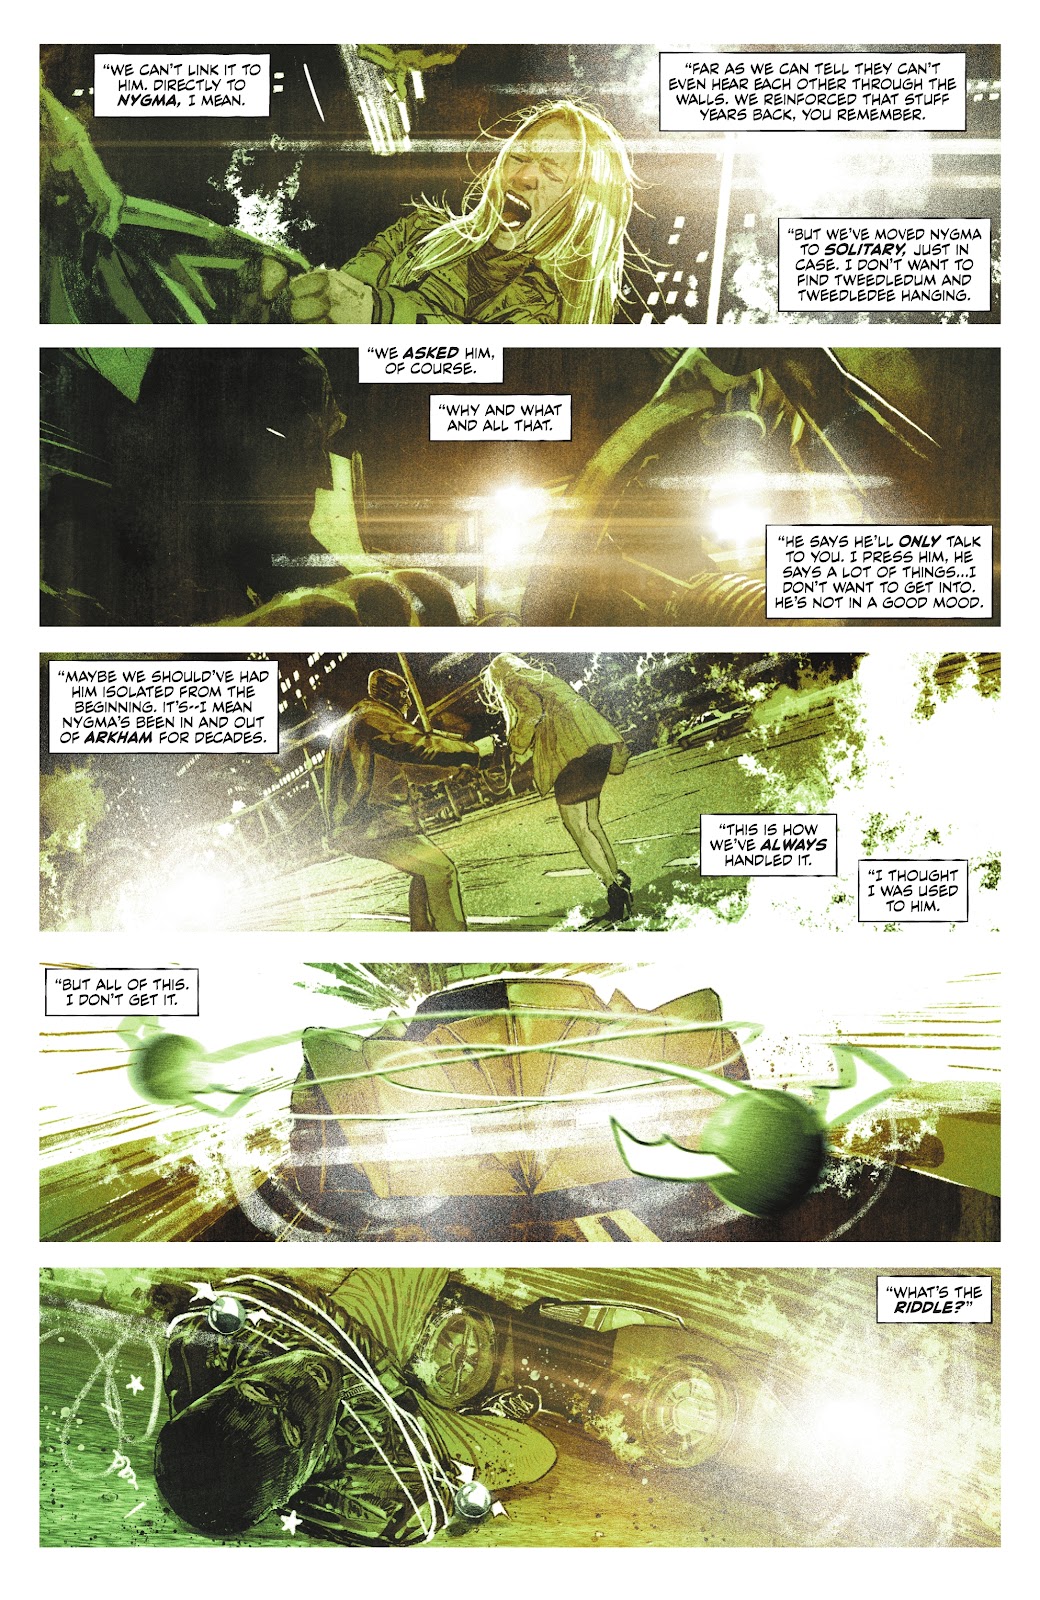 Batman: One Bad Day - The Riddler issue 1 - Page 25